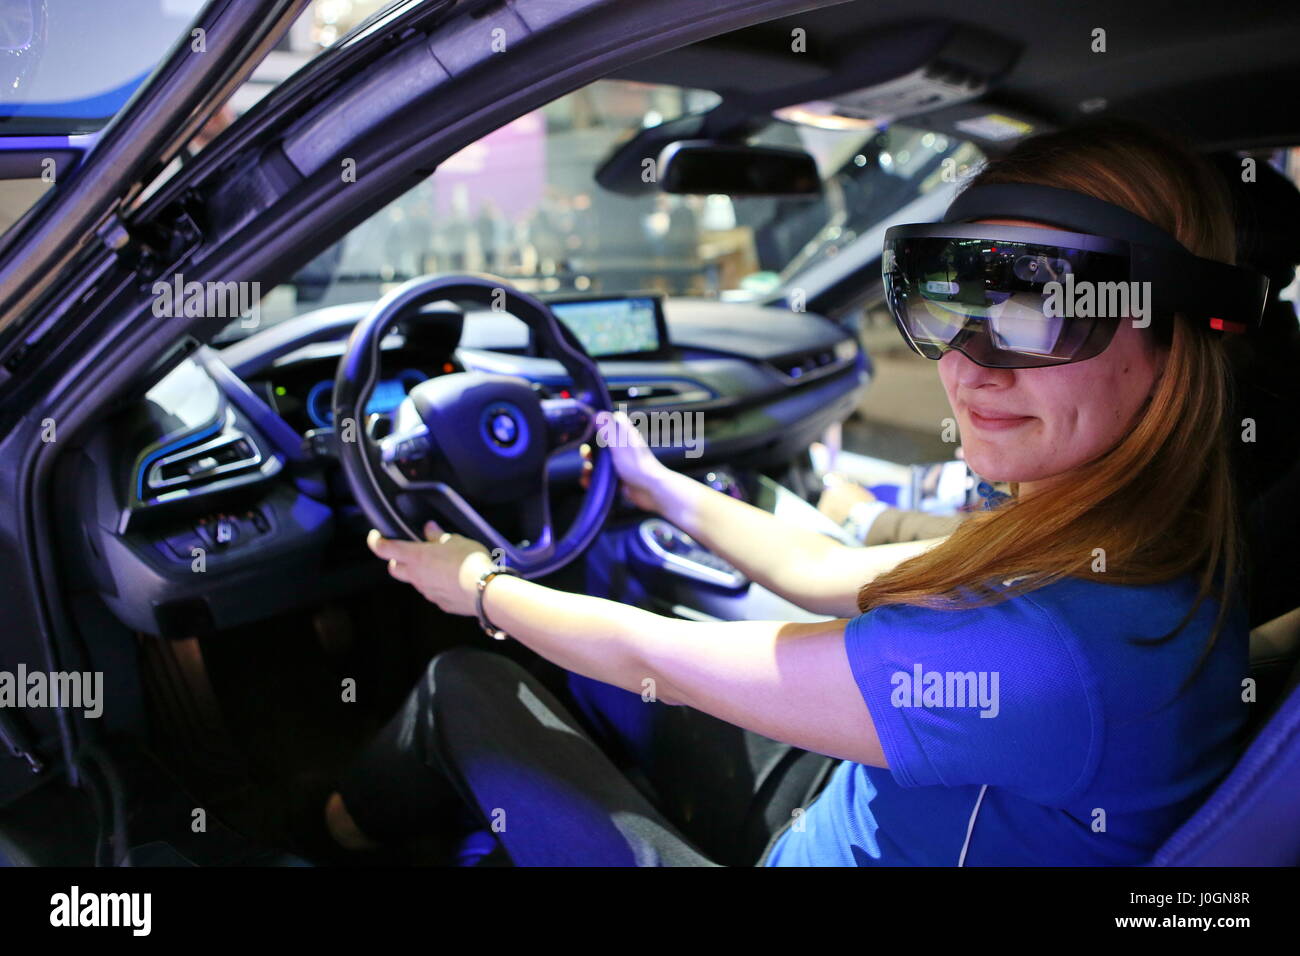 Hanover, Germany. 20th March, 2017. technology company Intel Corporation presents his automated driving solution Intel GO (coop with BMW and Mobileye), CeBIT 2017, ICT trade fair, lead theme 'd!conomy - no limits'. Photocredit: Christian Lademann Stock Photo